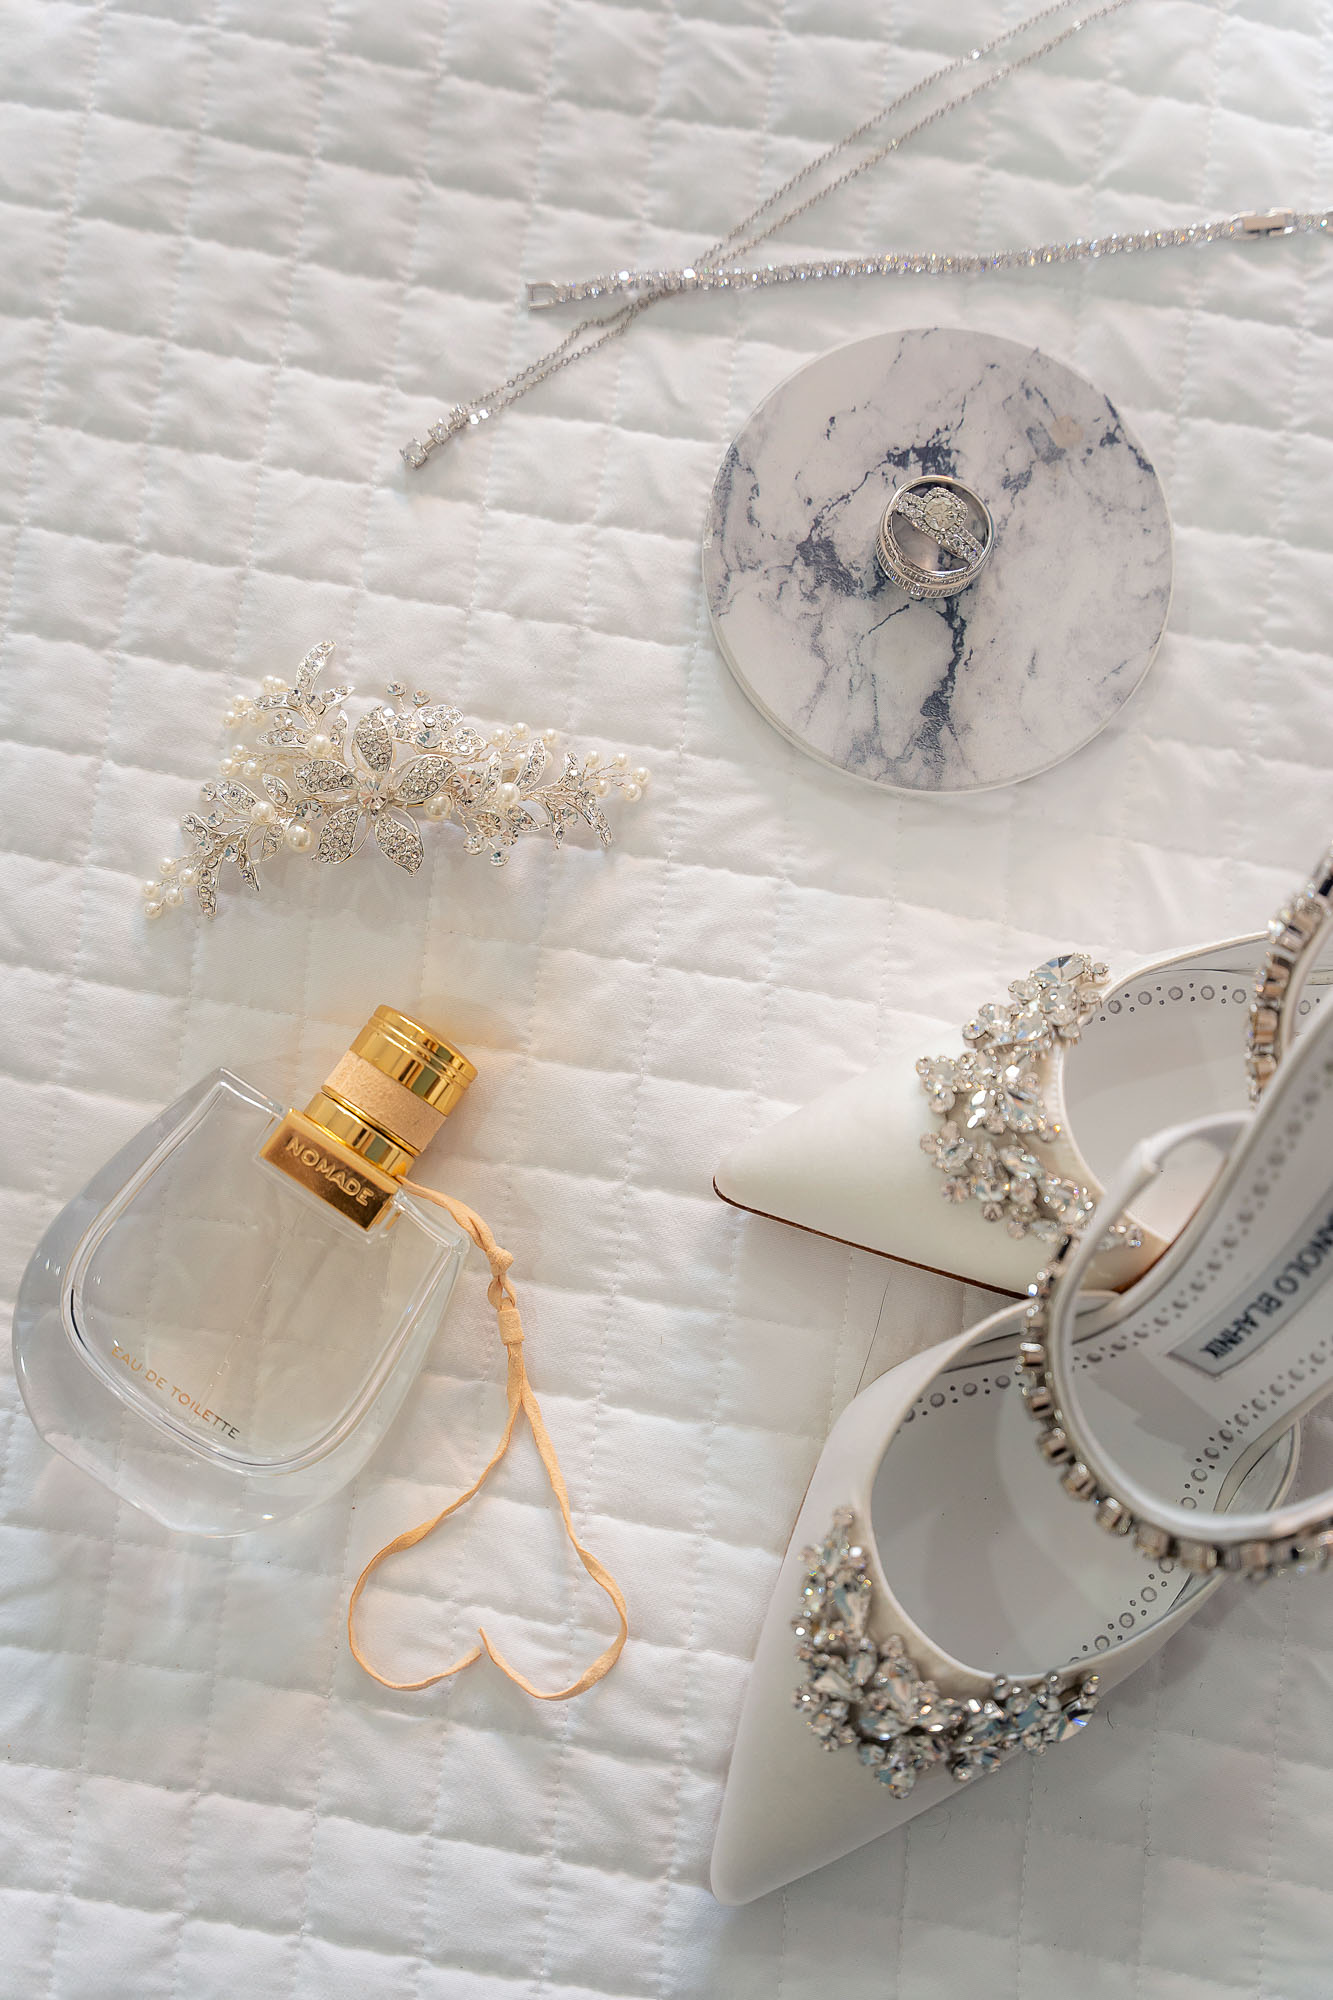 Pretty wedding details, shoes, rings, hairpiece, and perfume bottle